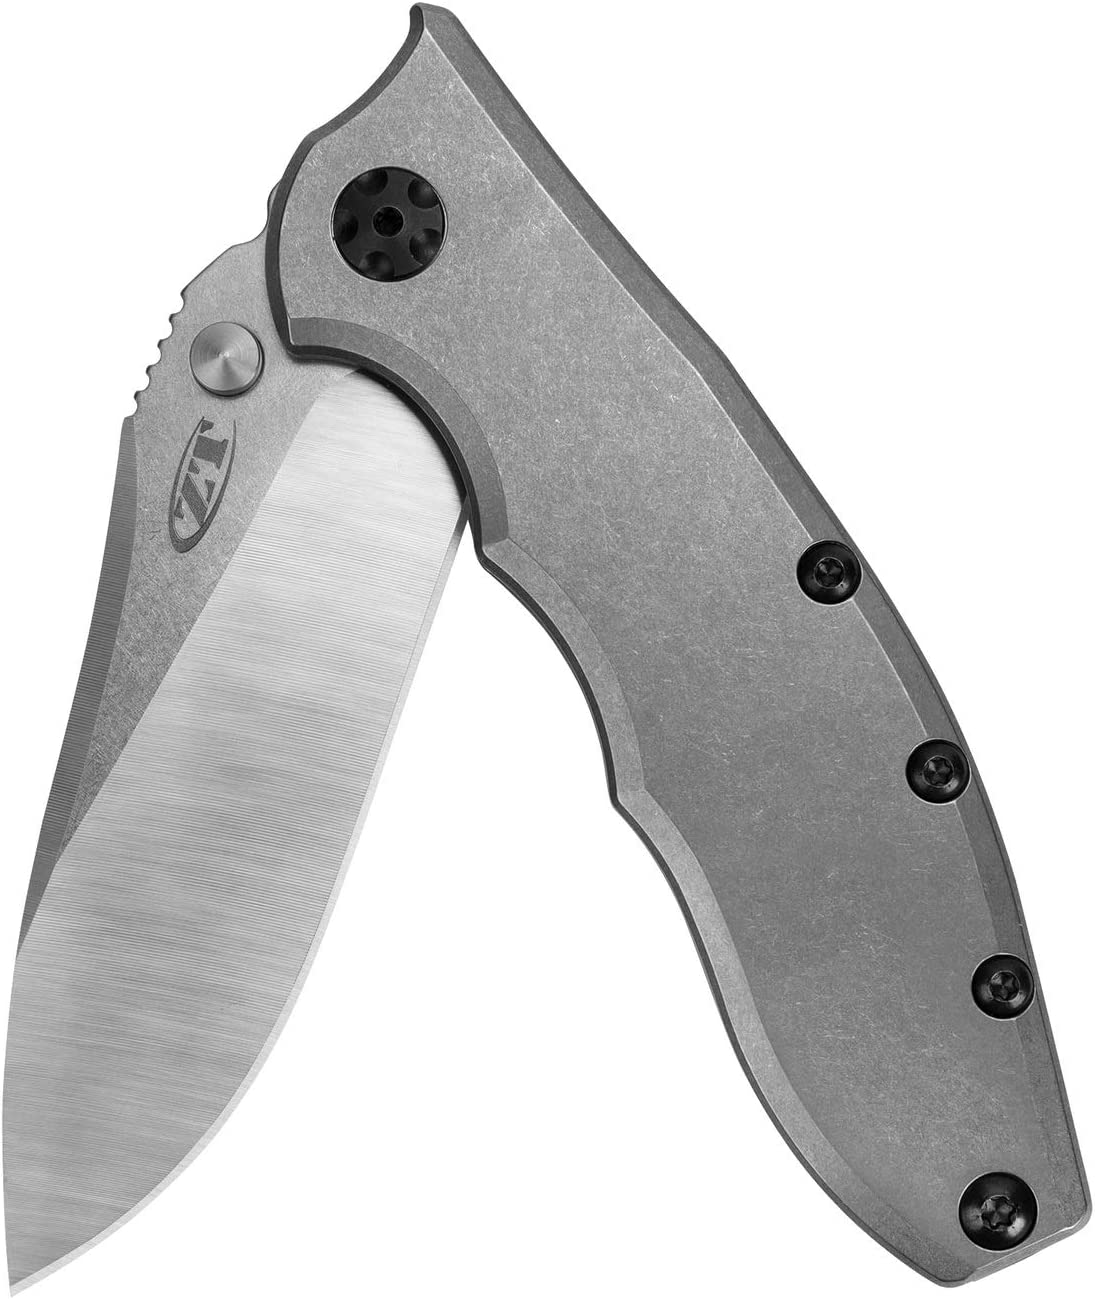 Zero Tolerance Hinderer Pocketknife; 3.5-Inch CPM 20CV Steel Blade, KVT Ball-Bearing Opening System, Flipper, Reversible Deep Carry Clip, Titanium Handle, Made in USA (0562TI)